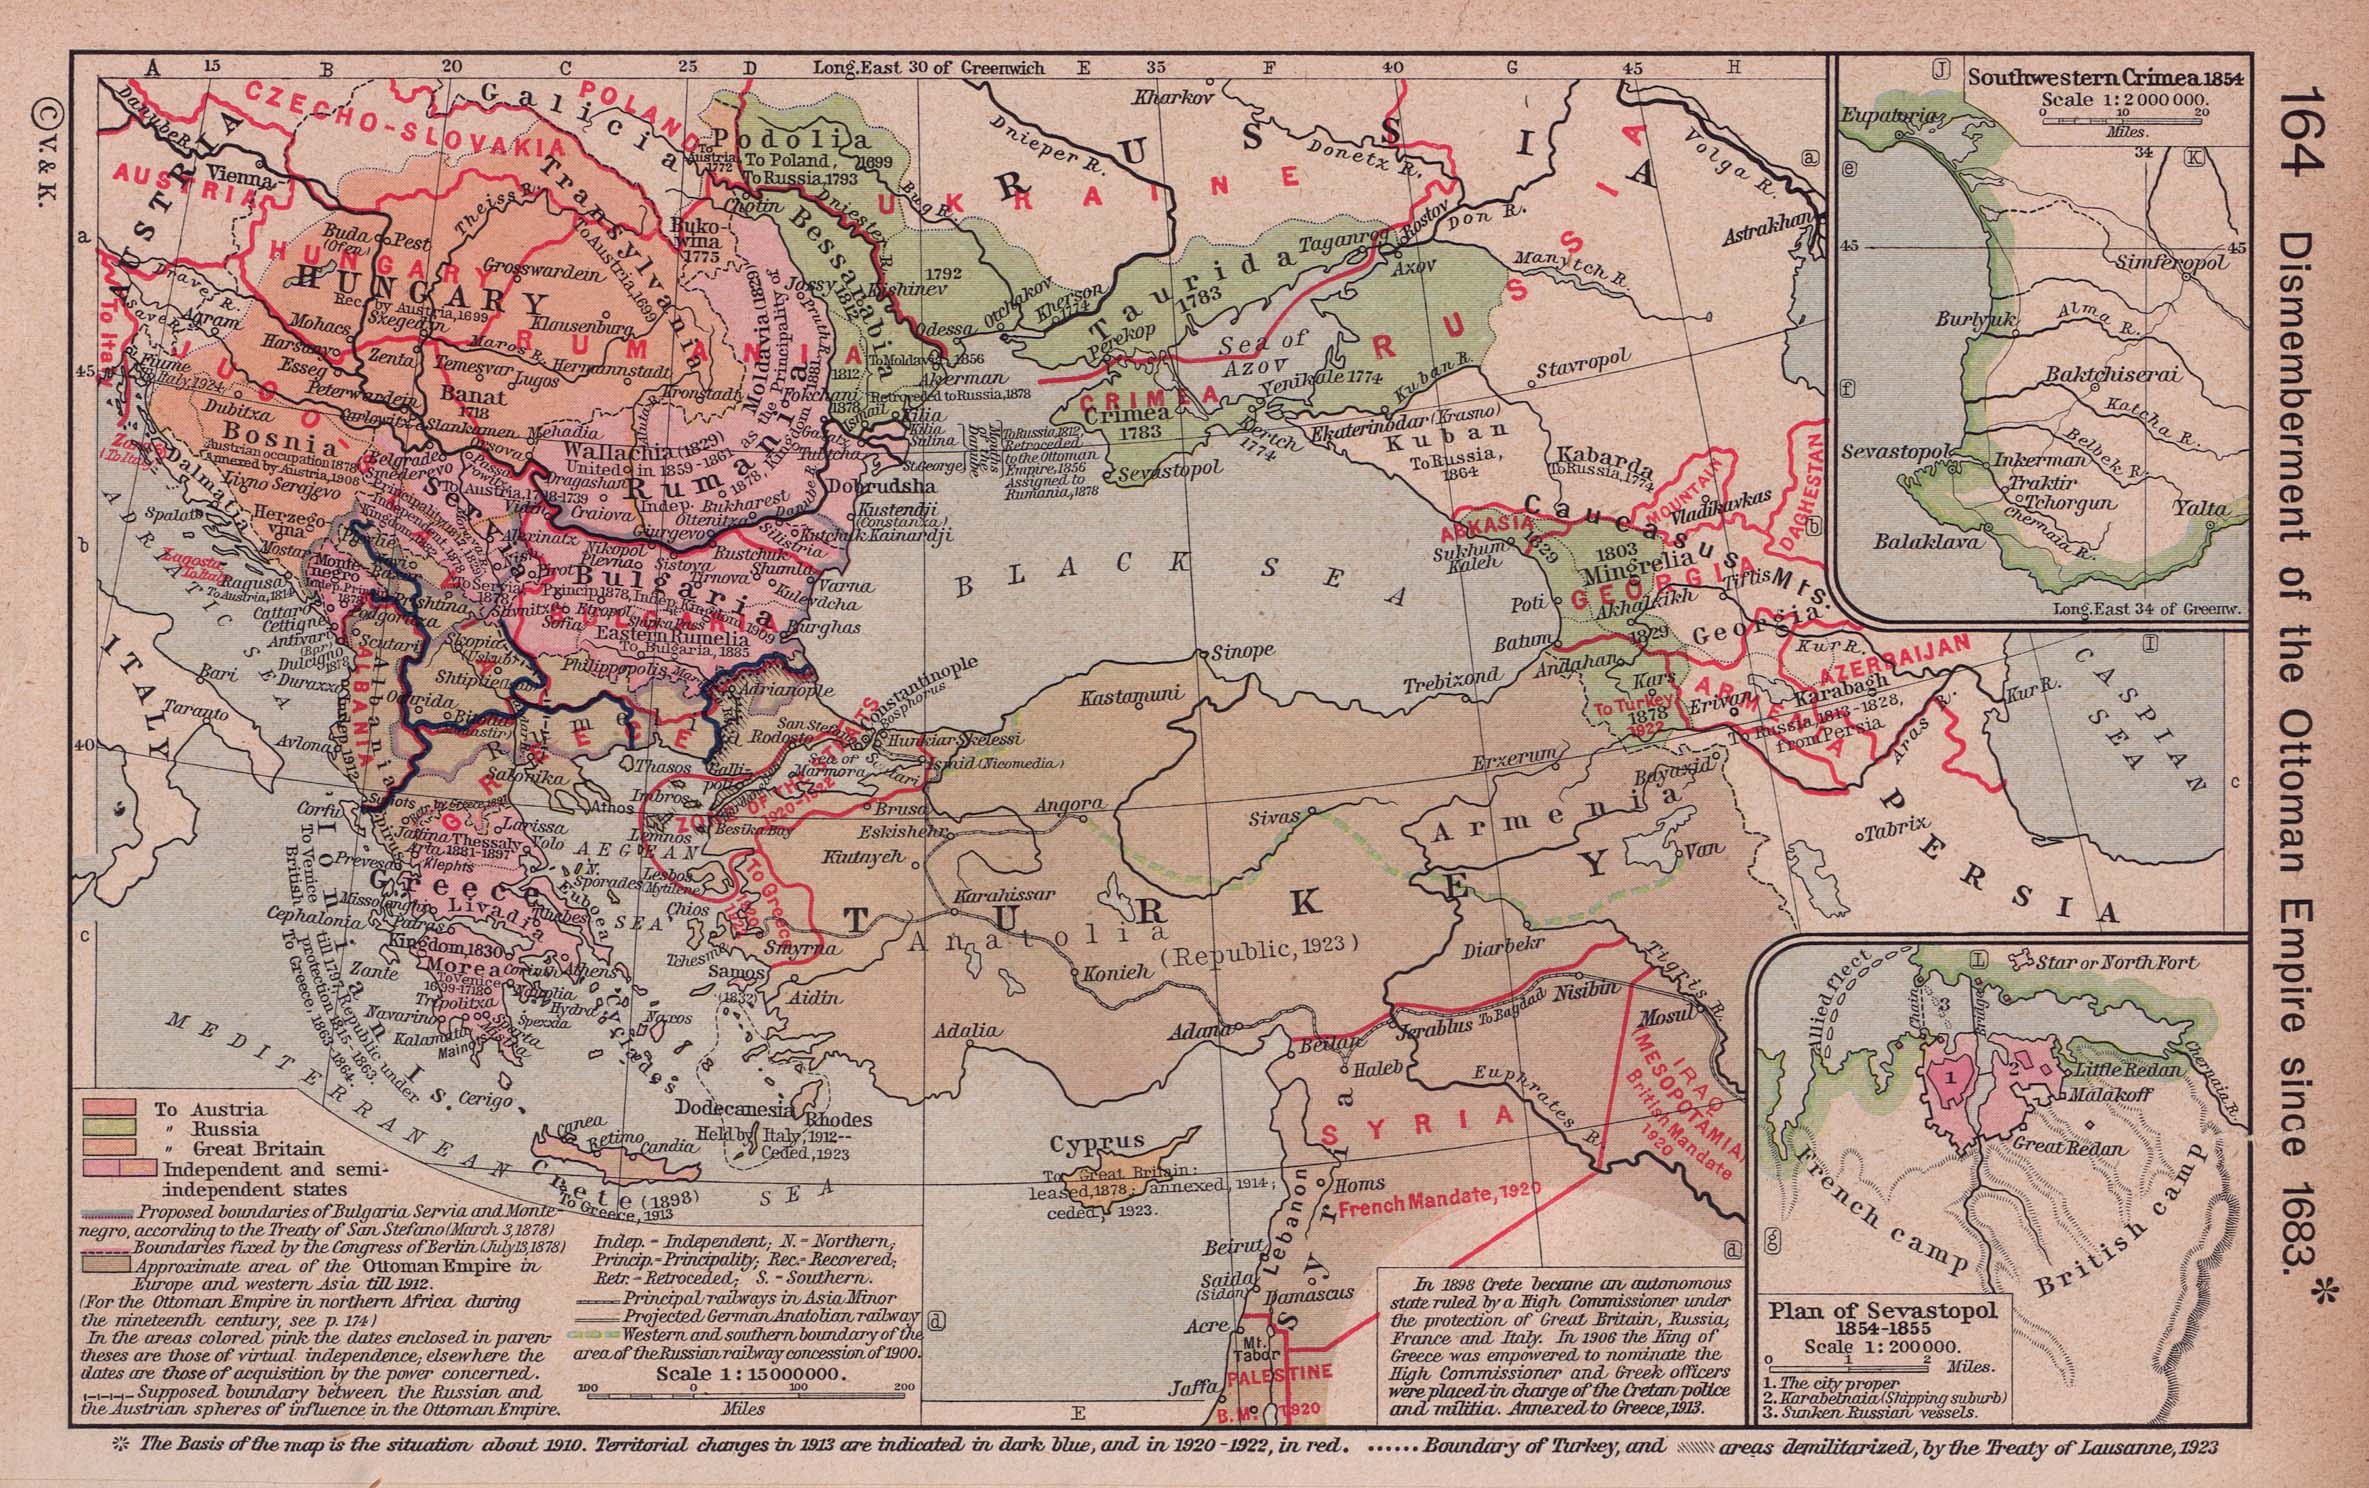 Historical Map of Balkan Dismemberment of the Ottoman Empire [1683-1923] (649K)
Map from 'Historical Atlas' by William R. Shepherd, 1923. 